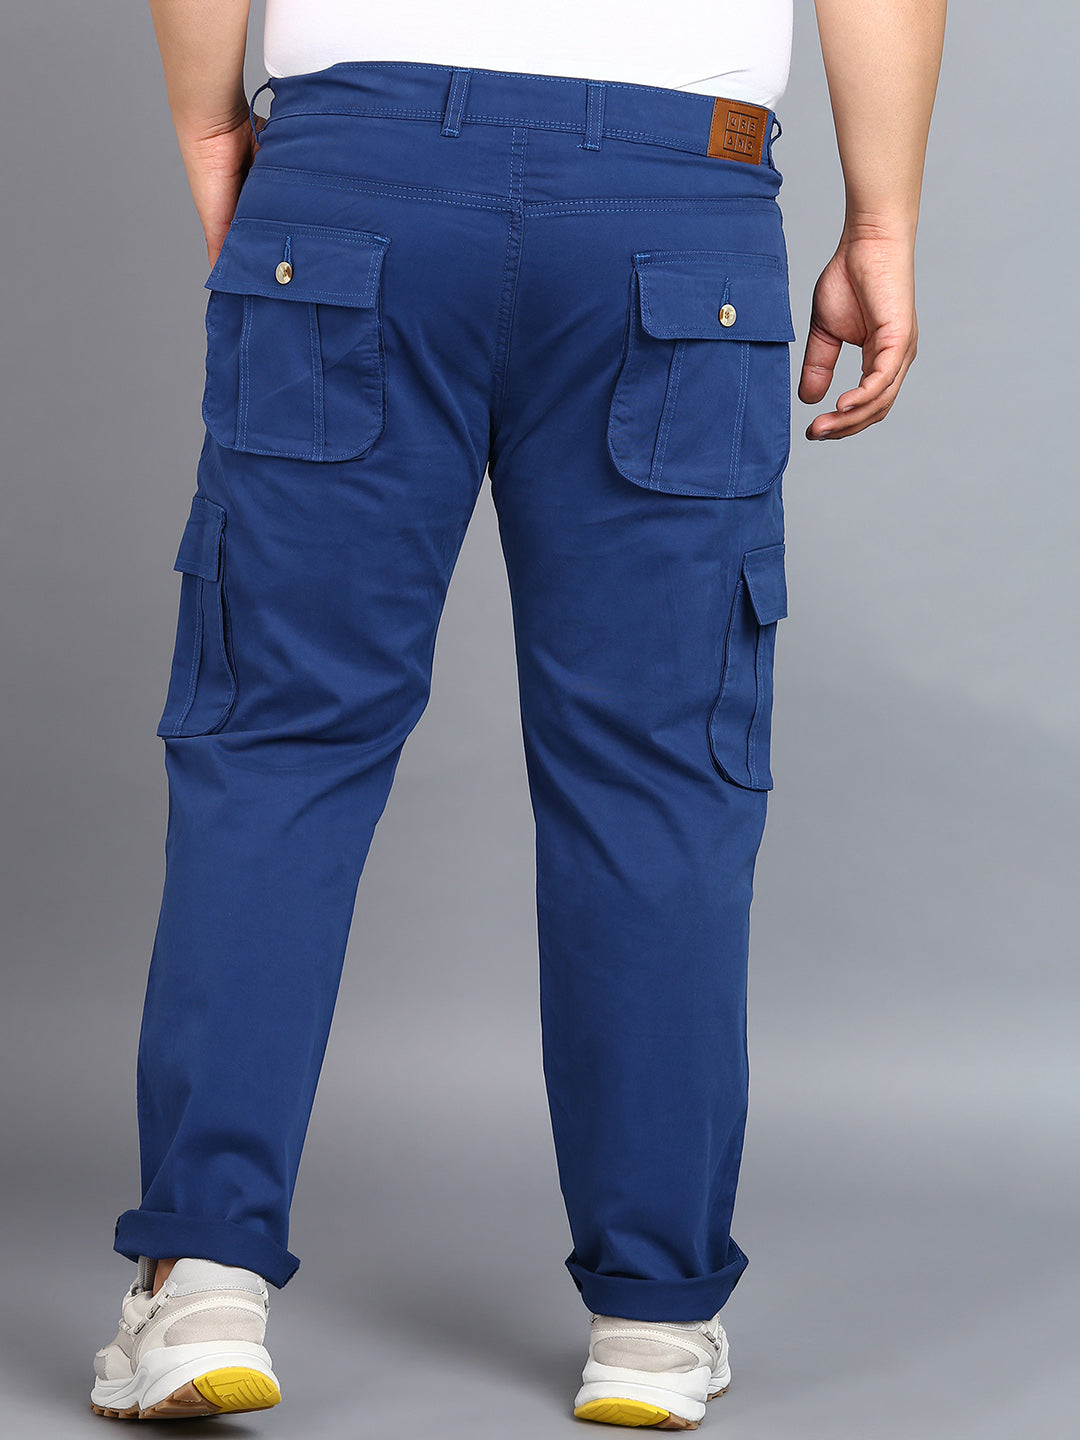 Plus Men's Royal Blue Regular Fit Solid Cargo Chino Pant with 6 Pockets